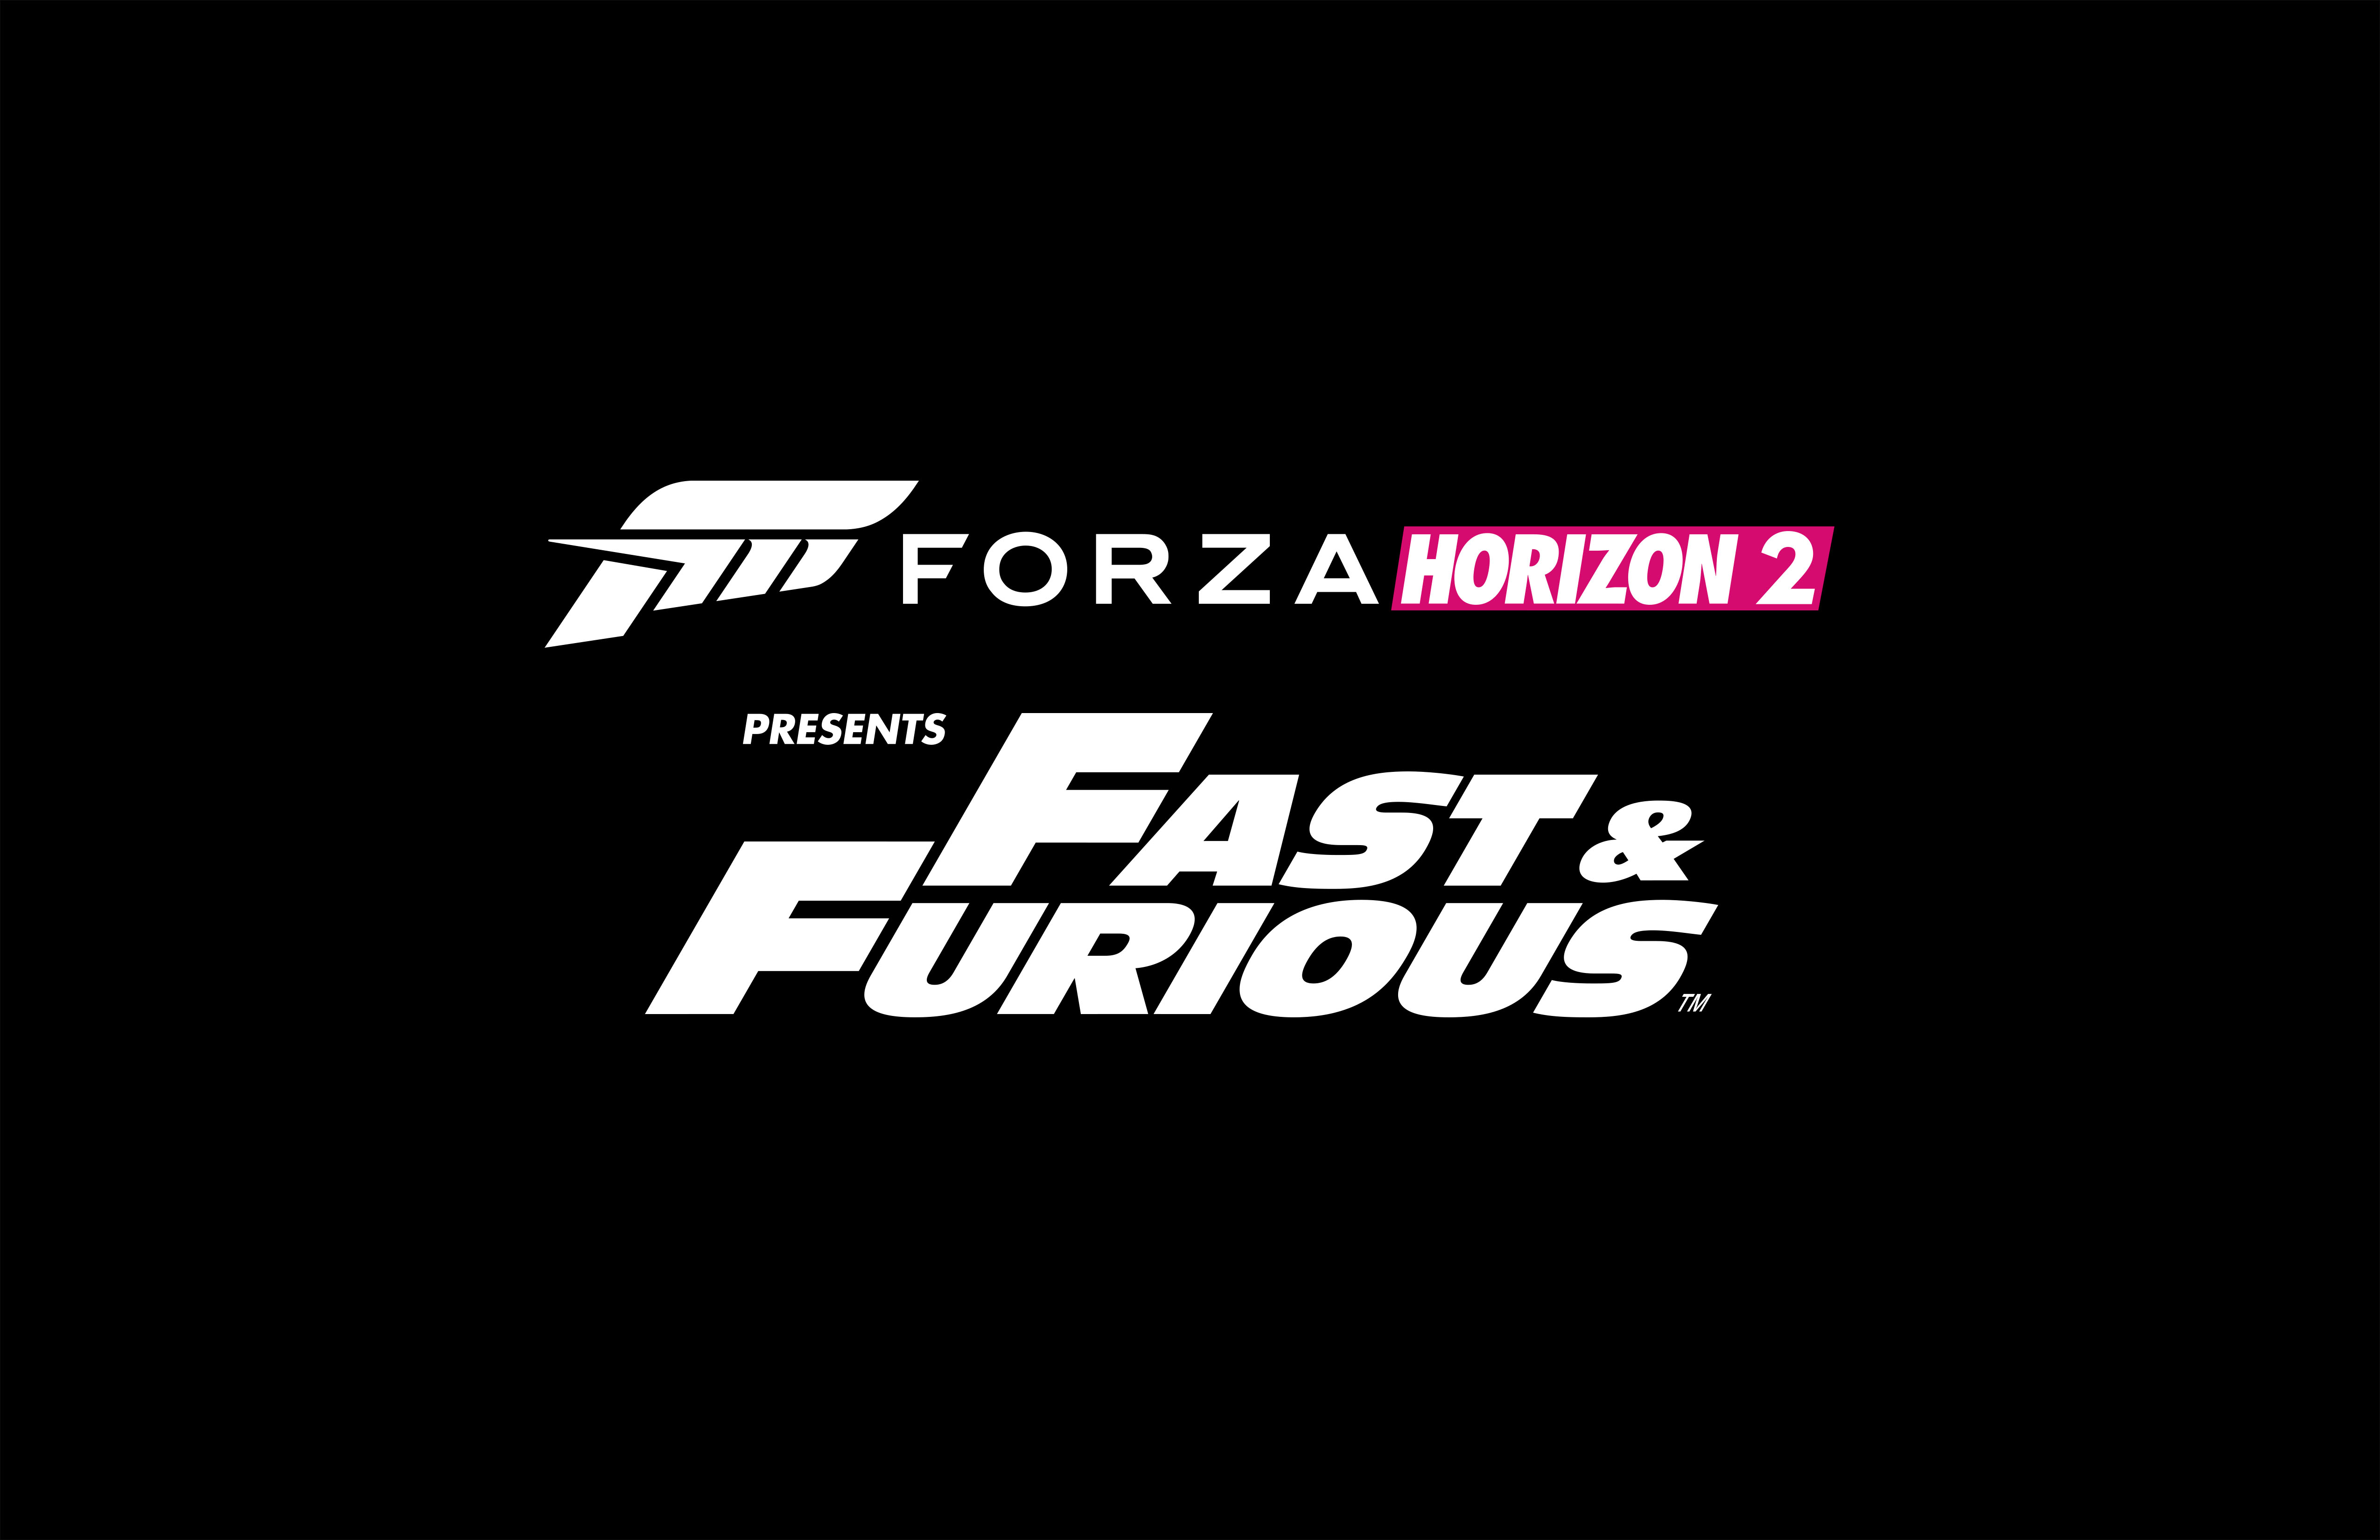 Video For Forza Horizon 2 Presents Fast & Furious – At No Charge for a Limited Time!